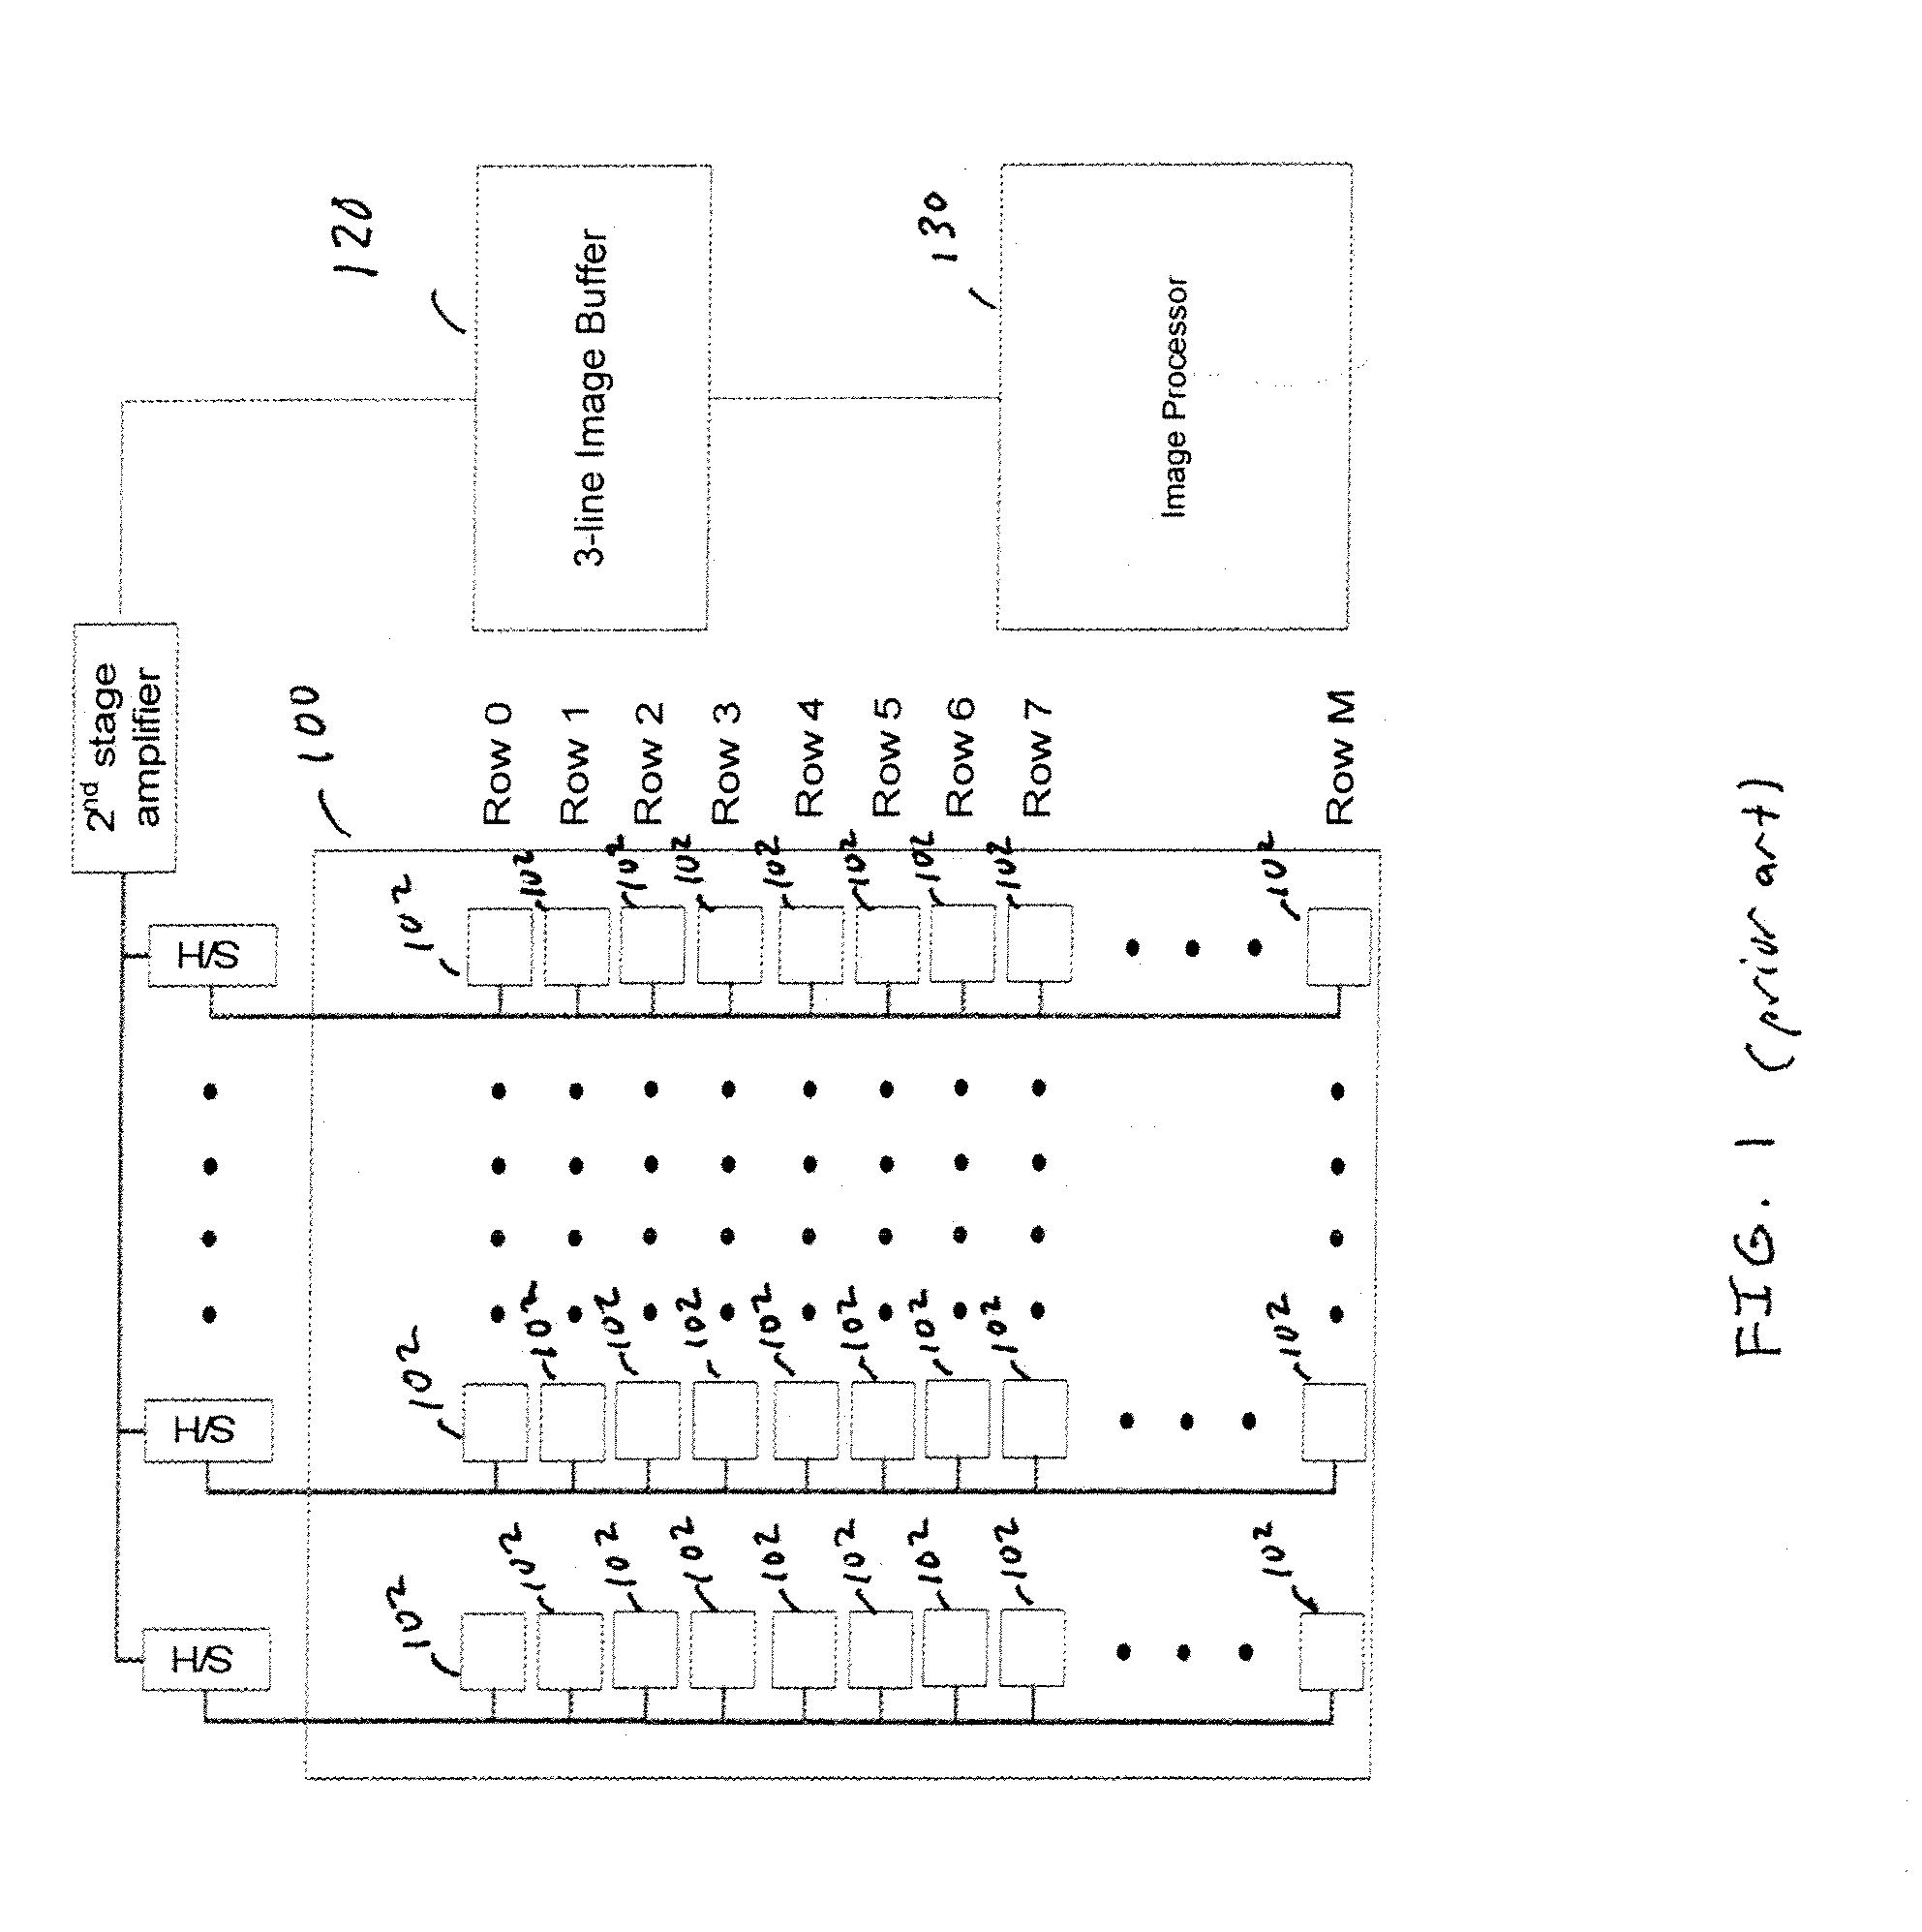 High dynamic range sensor with reduced line memory for color interpolation